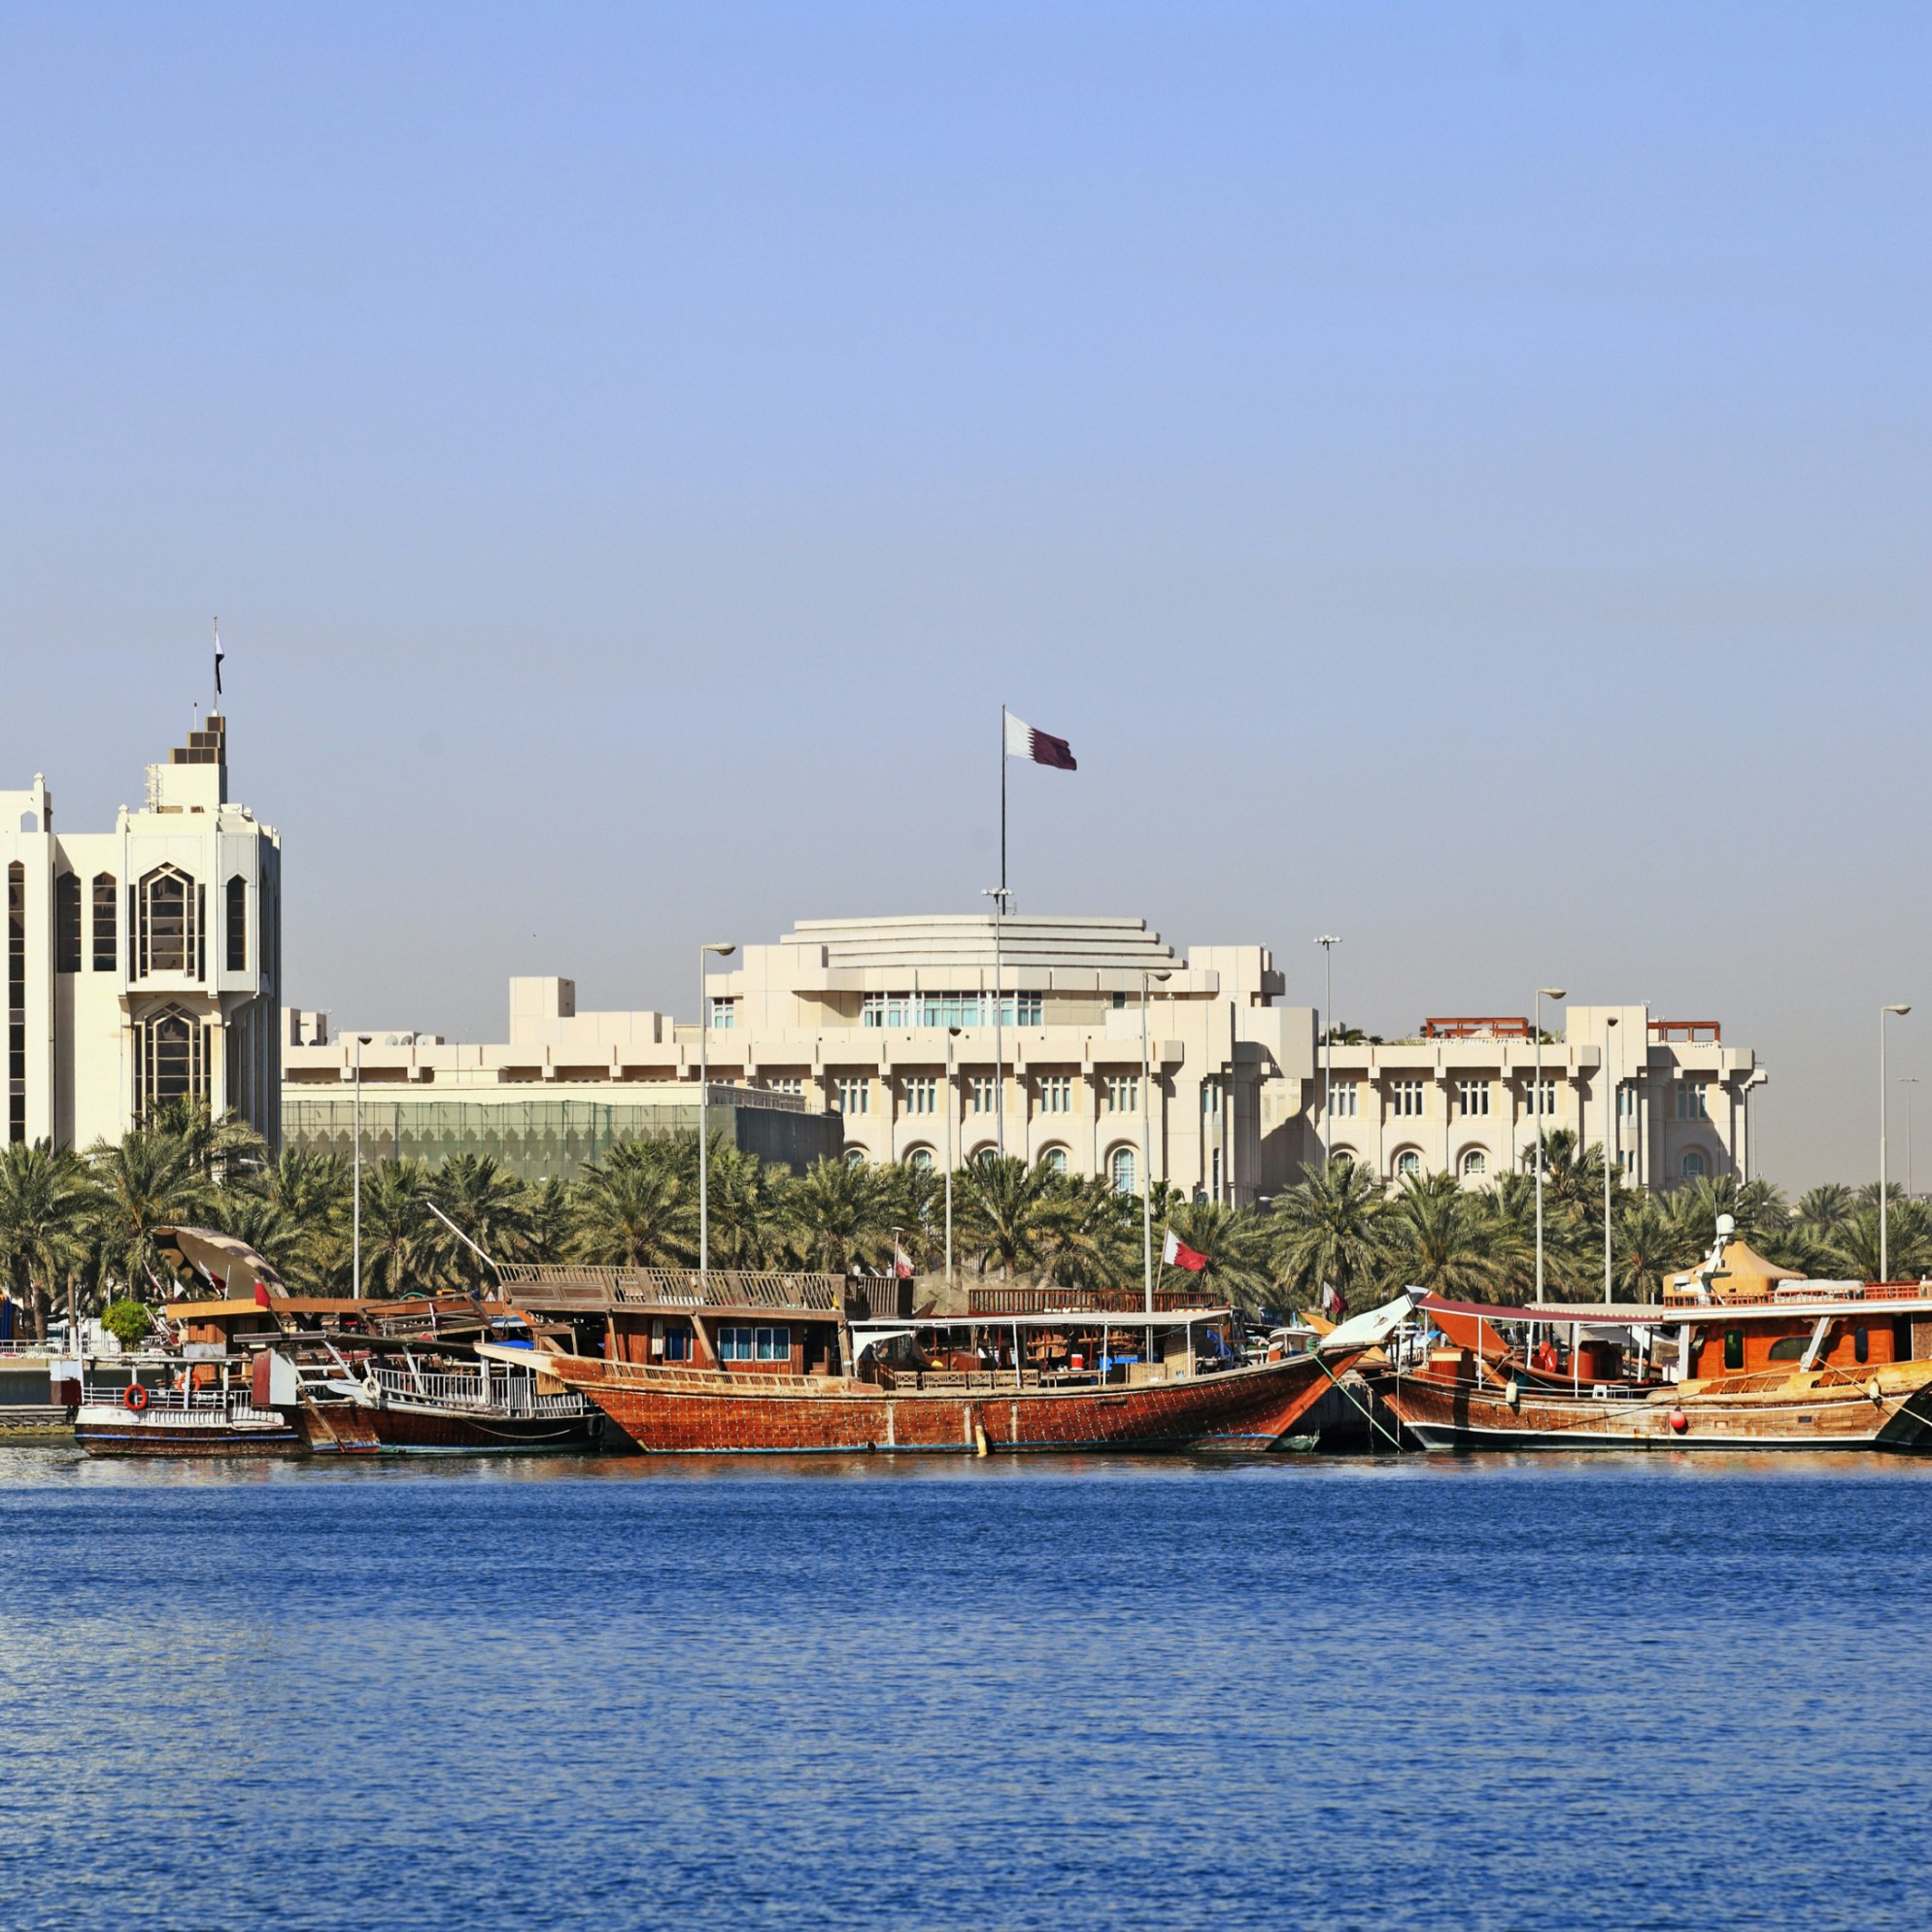 Qatar's foreign ministry (left) and Emiri Diwan ruler's administrative palace (centre with flag) seen across Doha Bay, with fishing dhows moored in front of the government buildings.; Shutterstock ID 49093879; Your name (First / Last): Lauren Keith; GL account no.: 65050; Netsuite department name: Online Editorial; Full Product or Project name including edition: Destination page image update